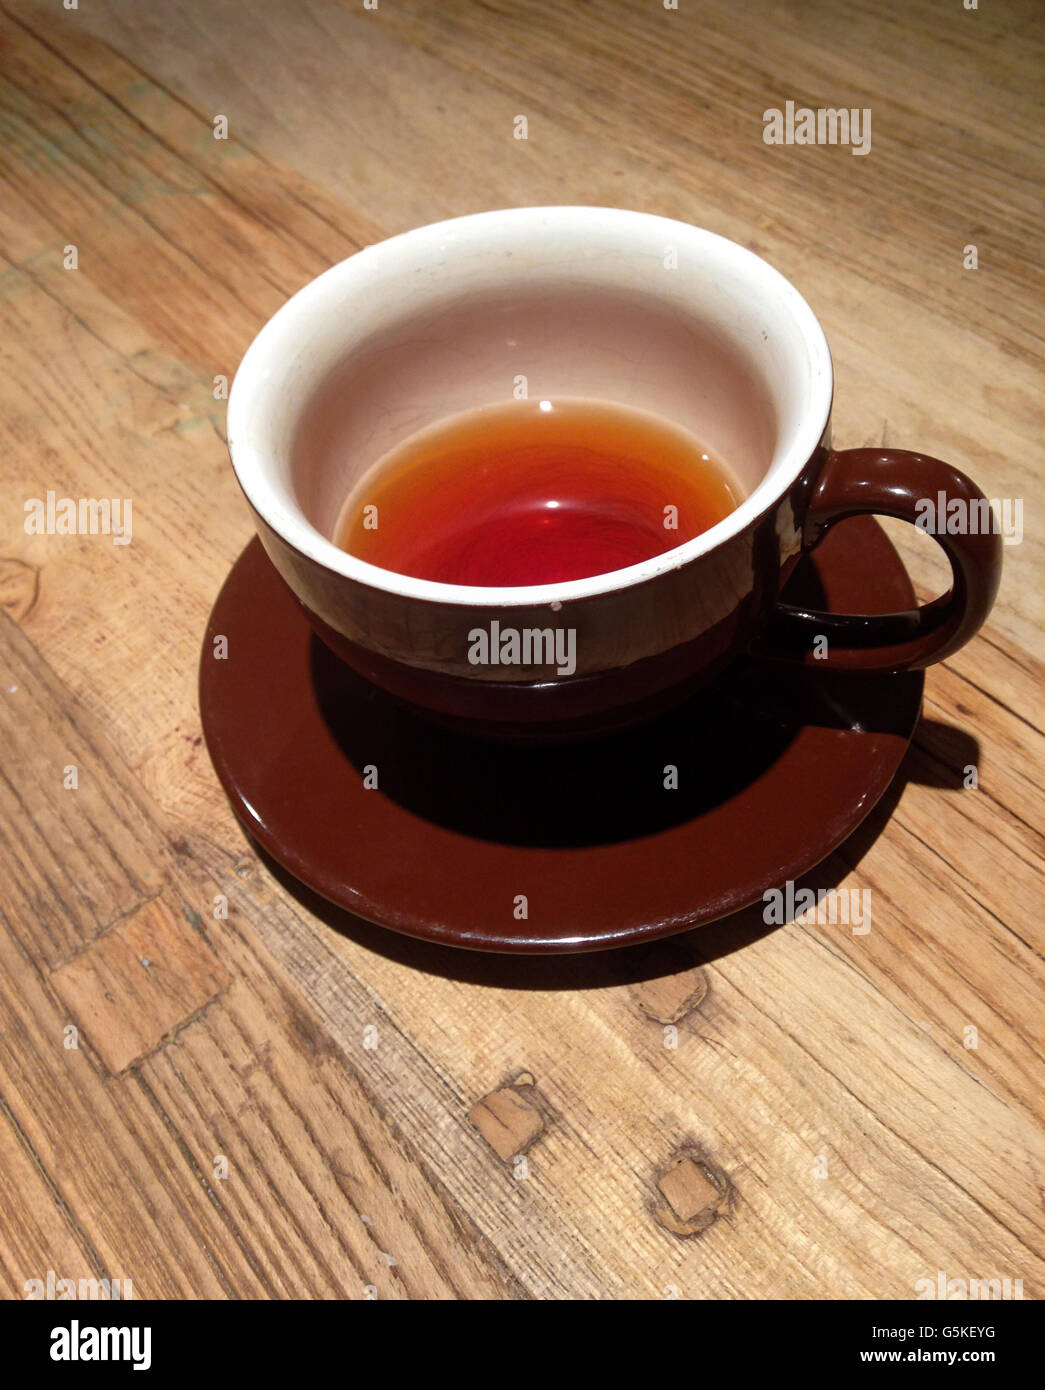 Cup of tea with saucer on wood surface Stock Photo